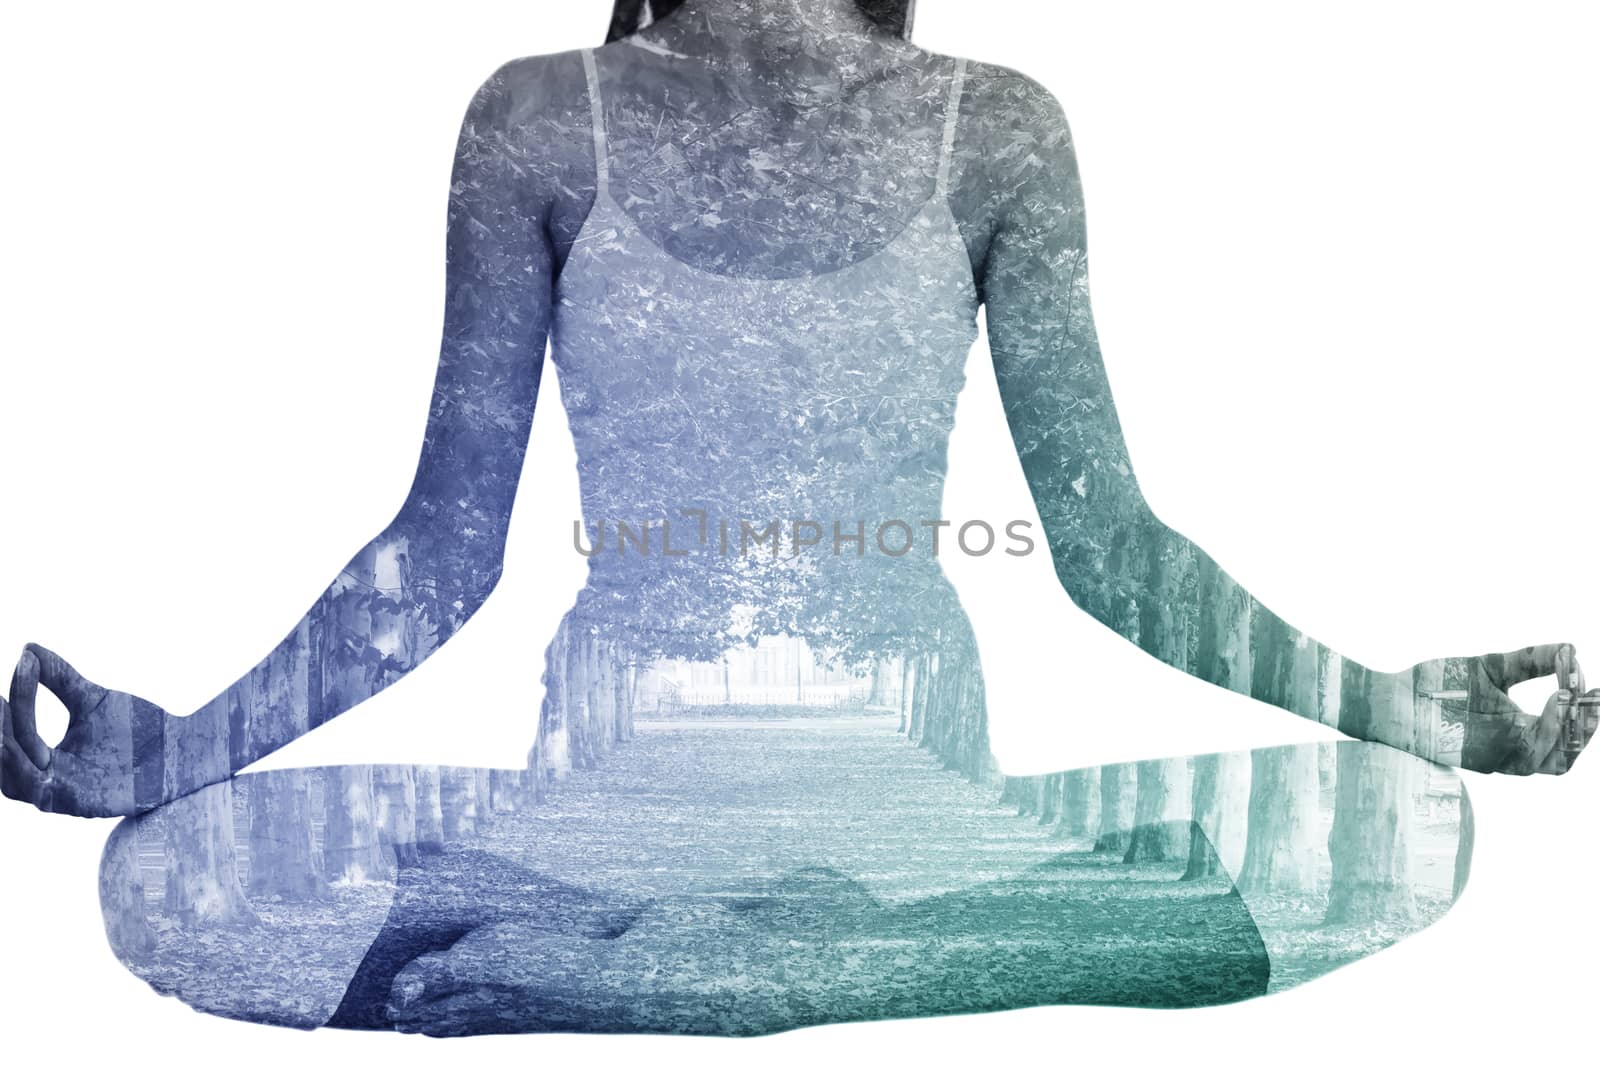 Toned woman in lotus pose at fitness studio against walkway along lined trees in the park